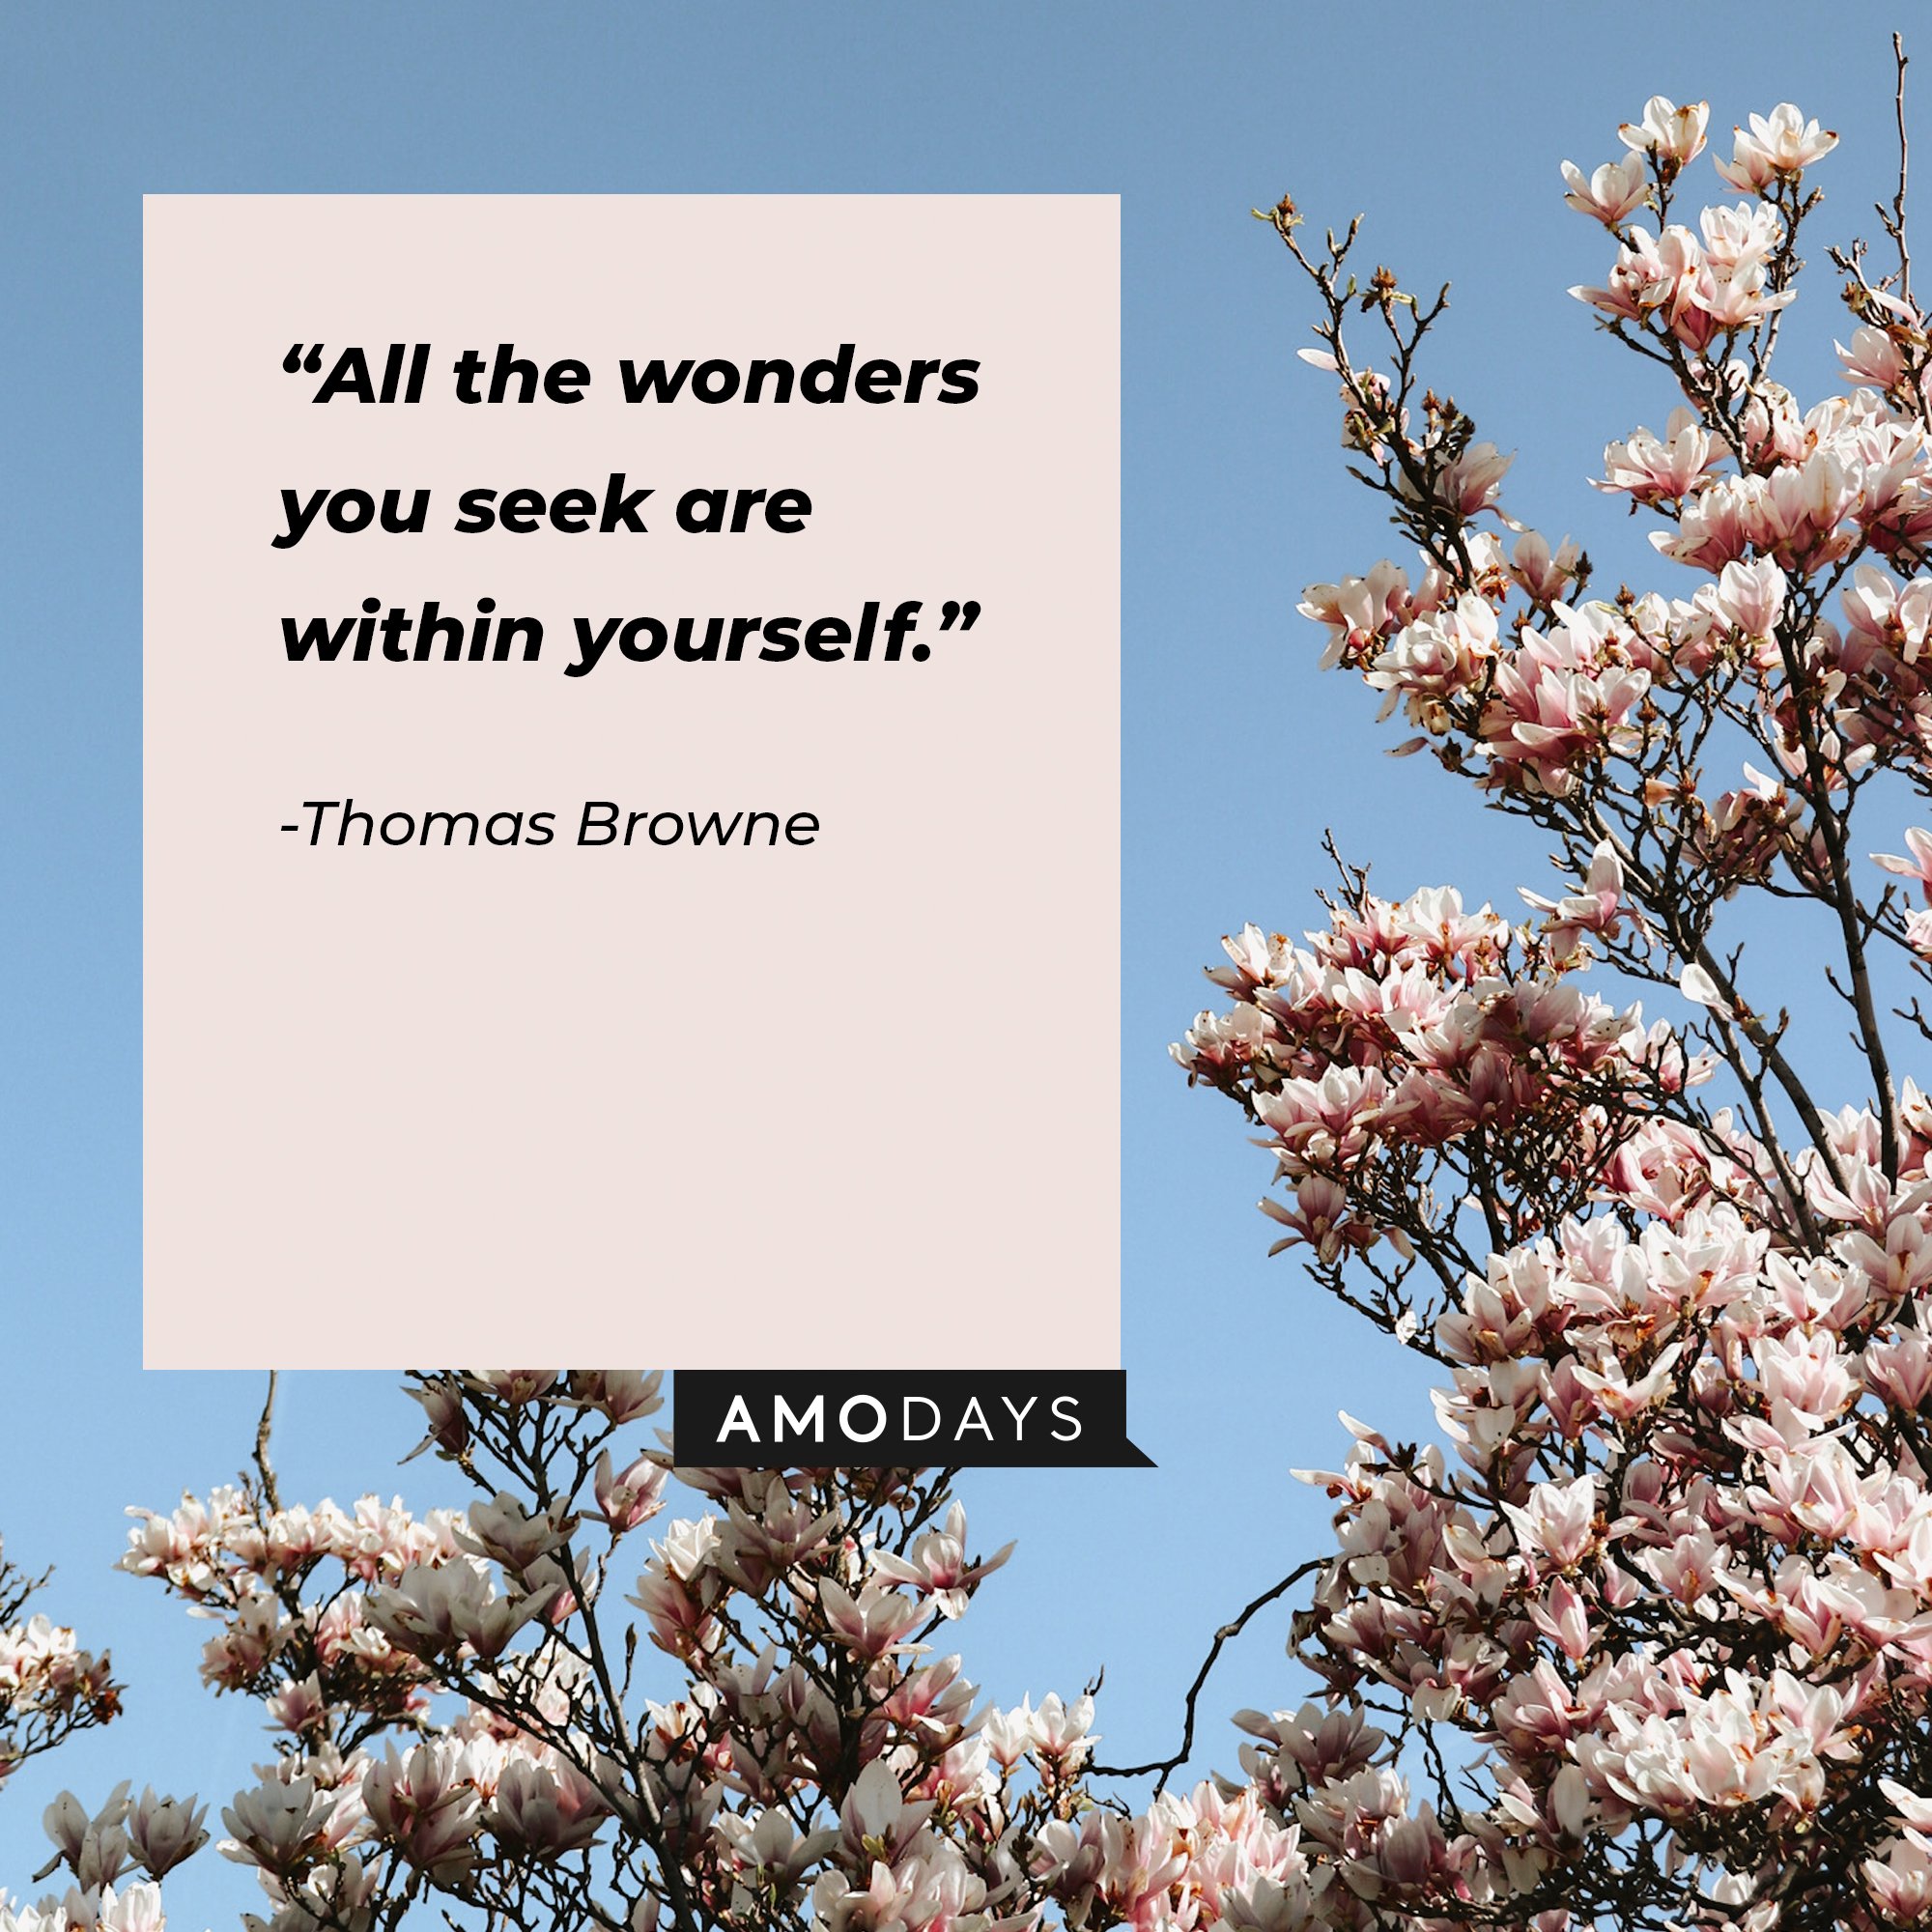 Thomas Browne's quote: “All the wonders you seek are within yourself.”  | Image: AmoDays